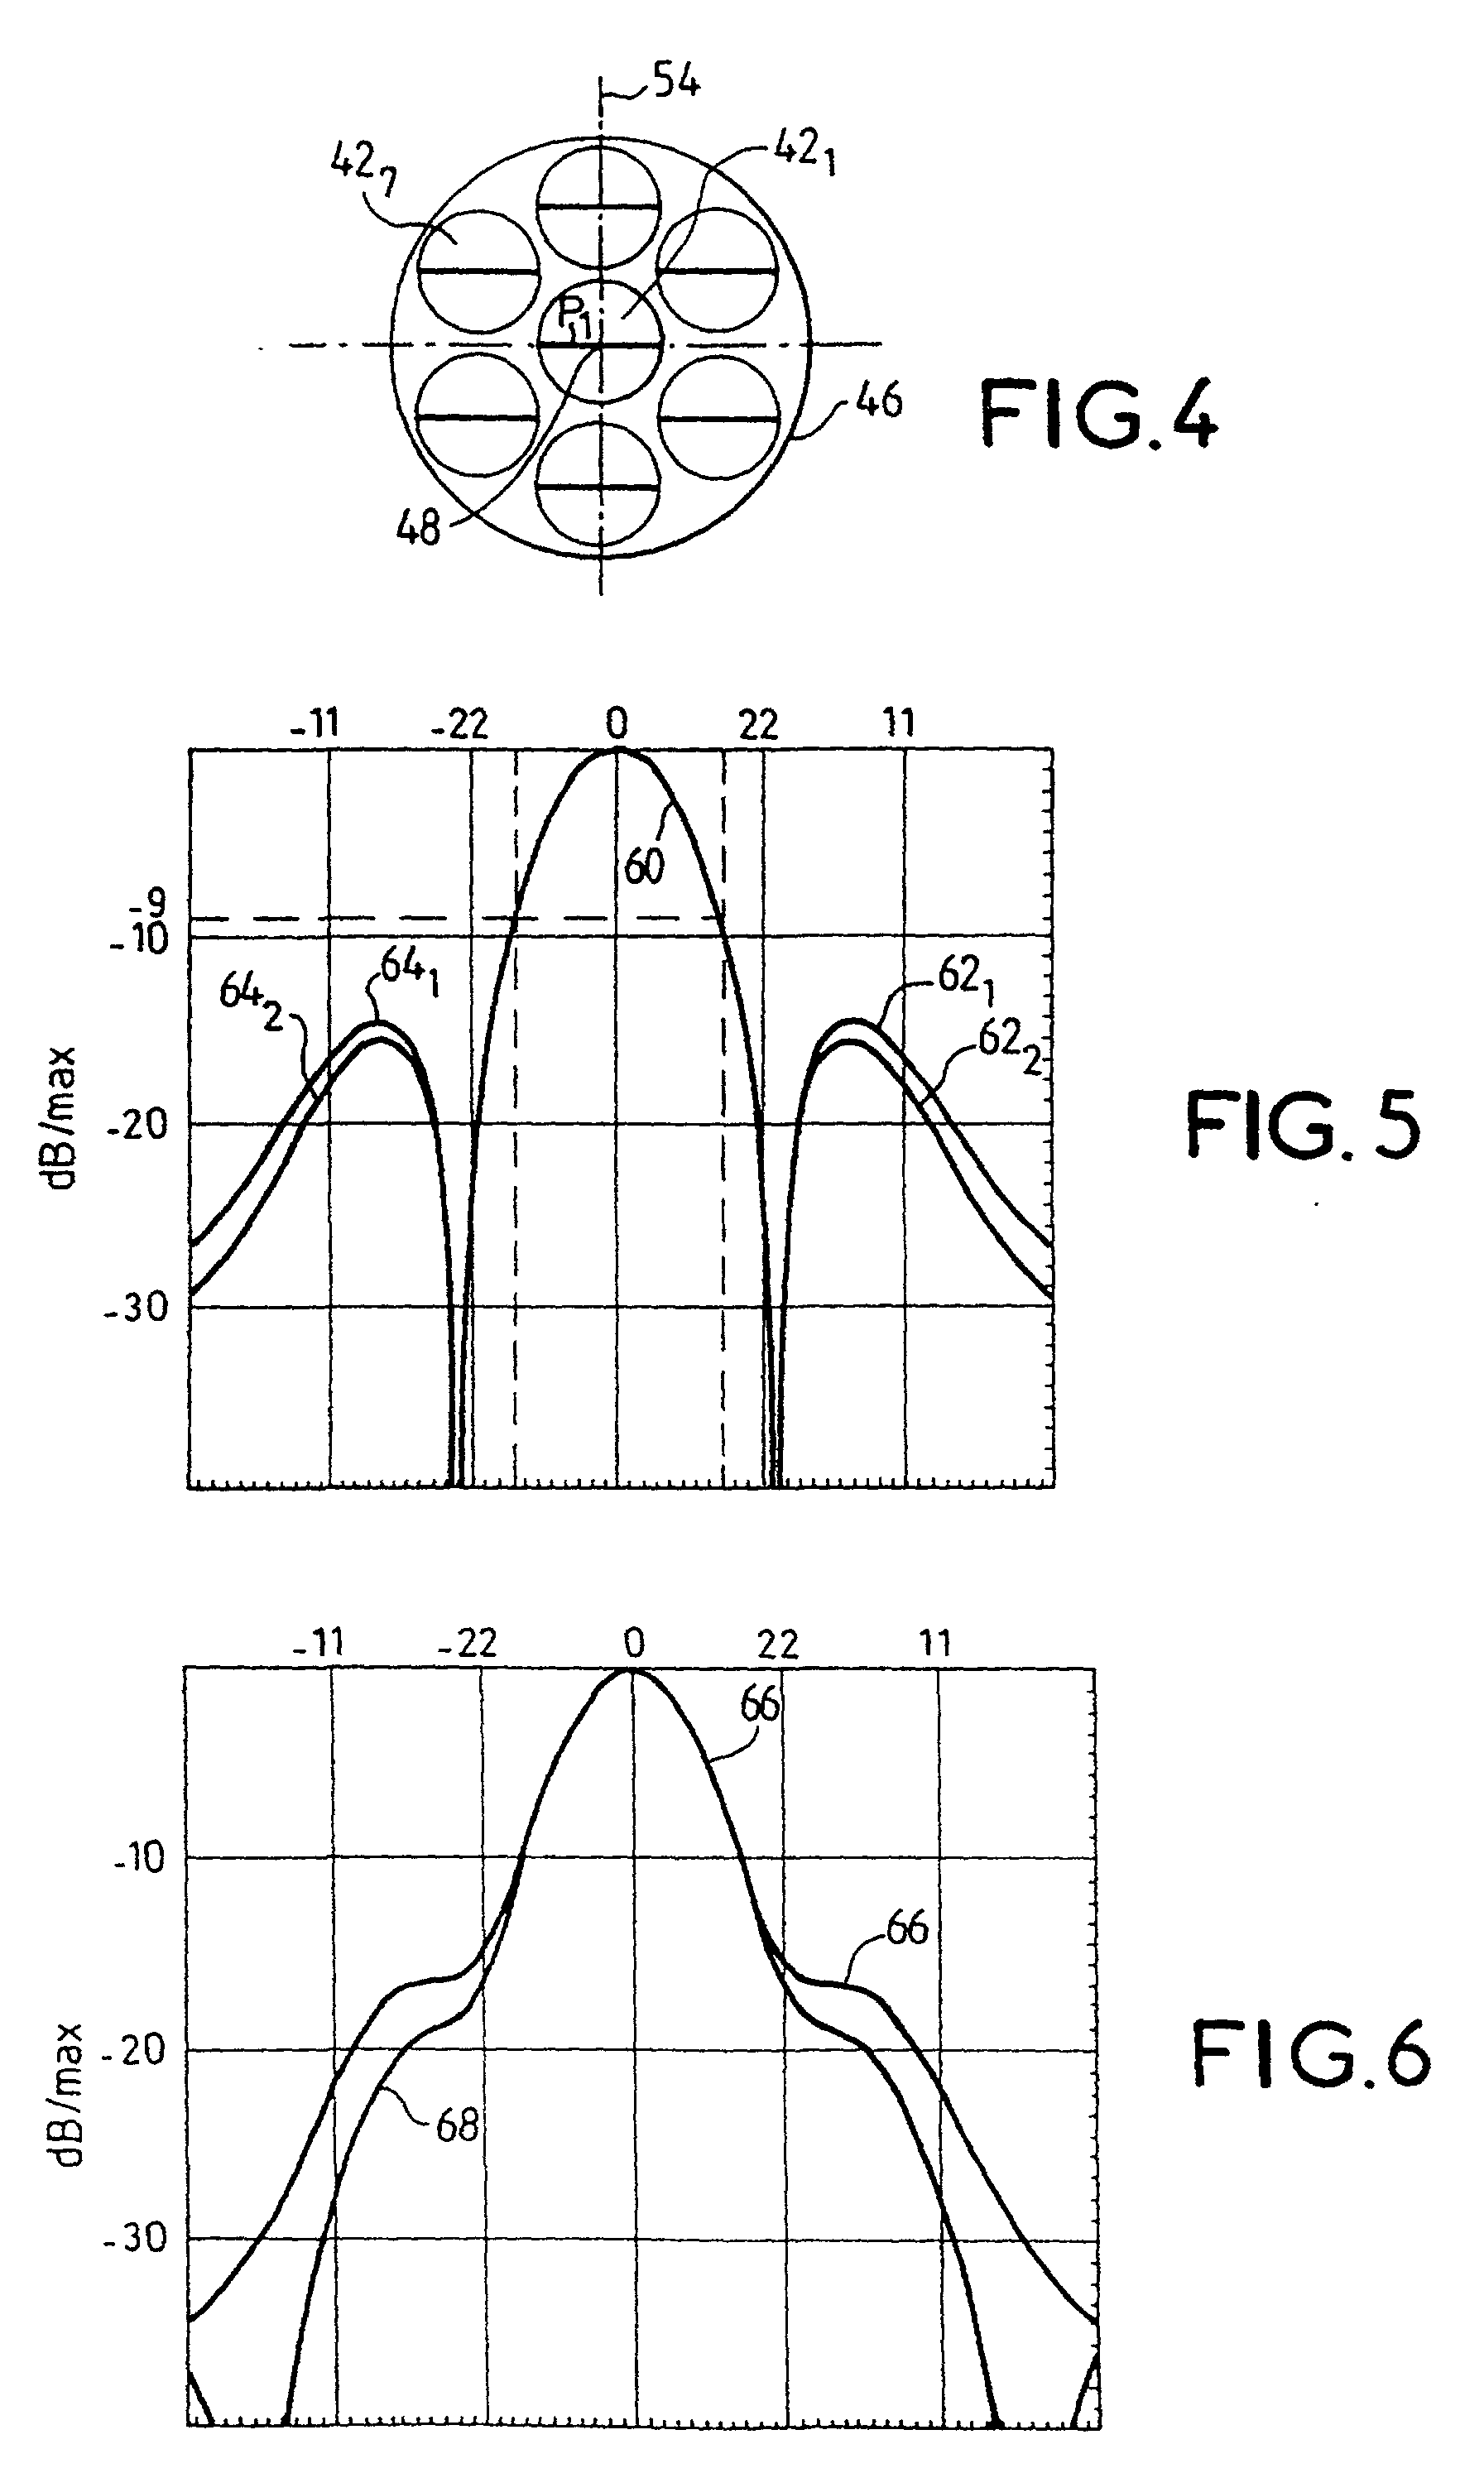 Radiating source for a transmit and receive antenna intended to be installed on board a satellite